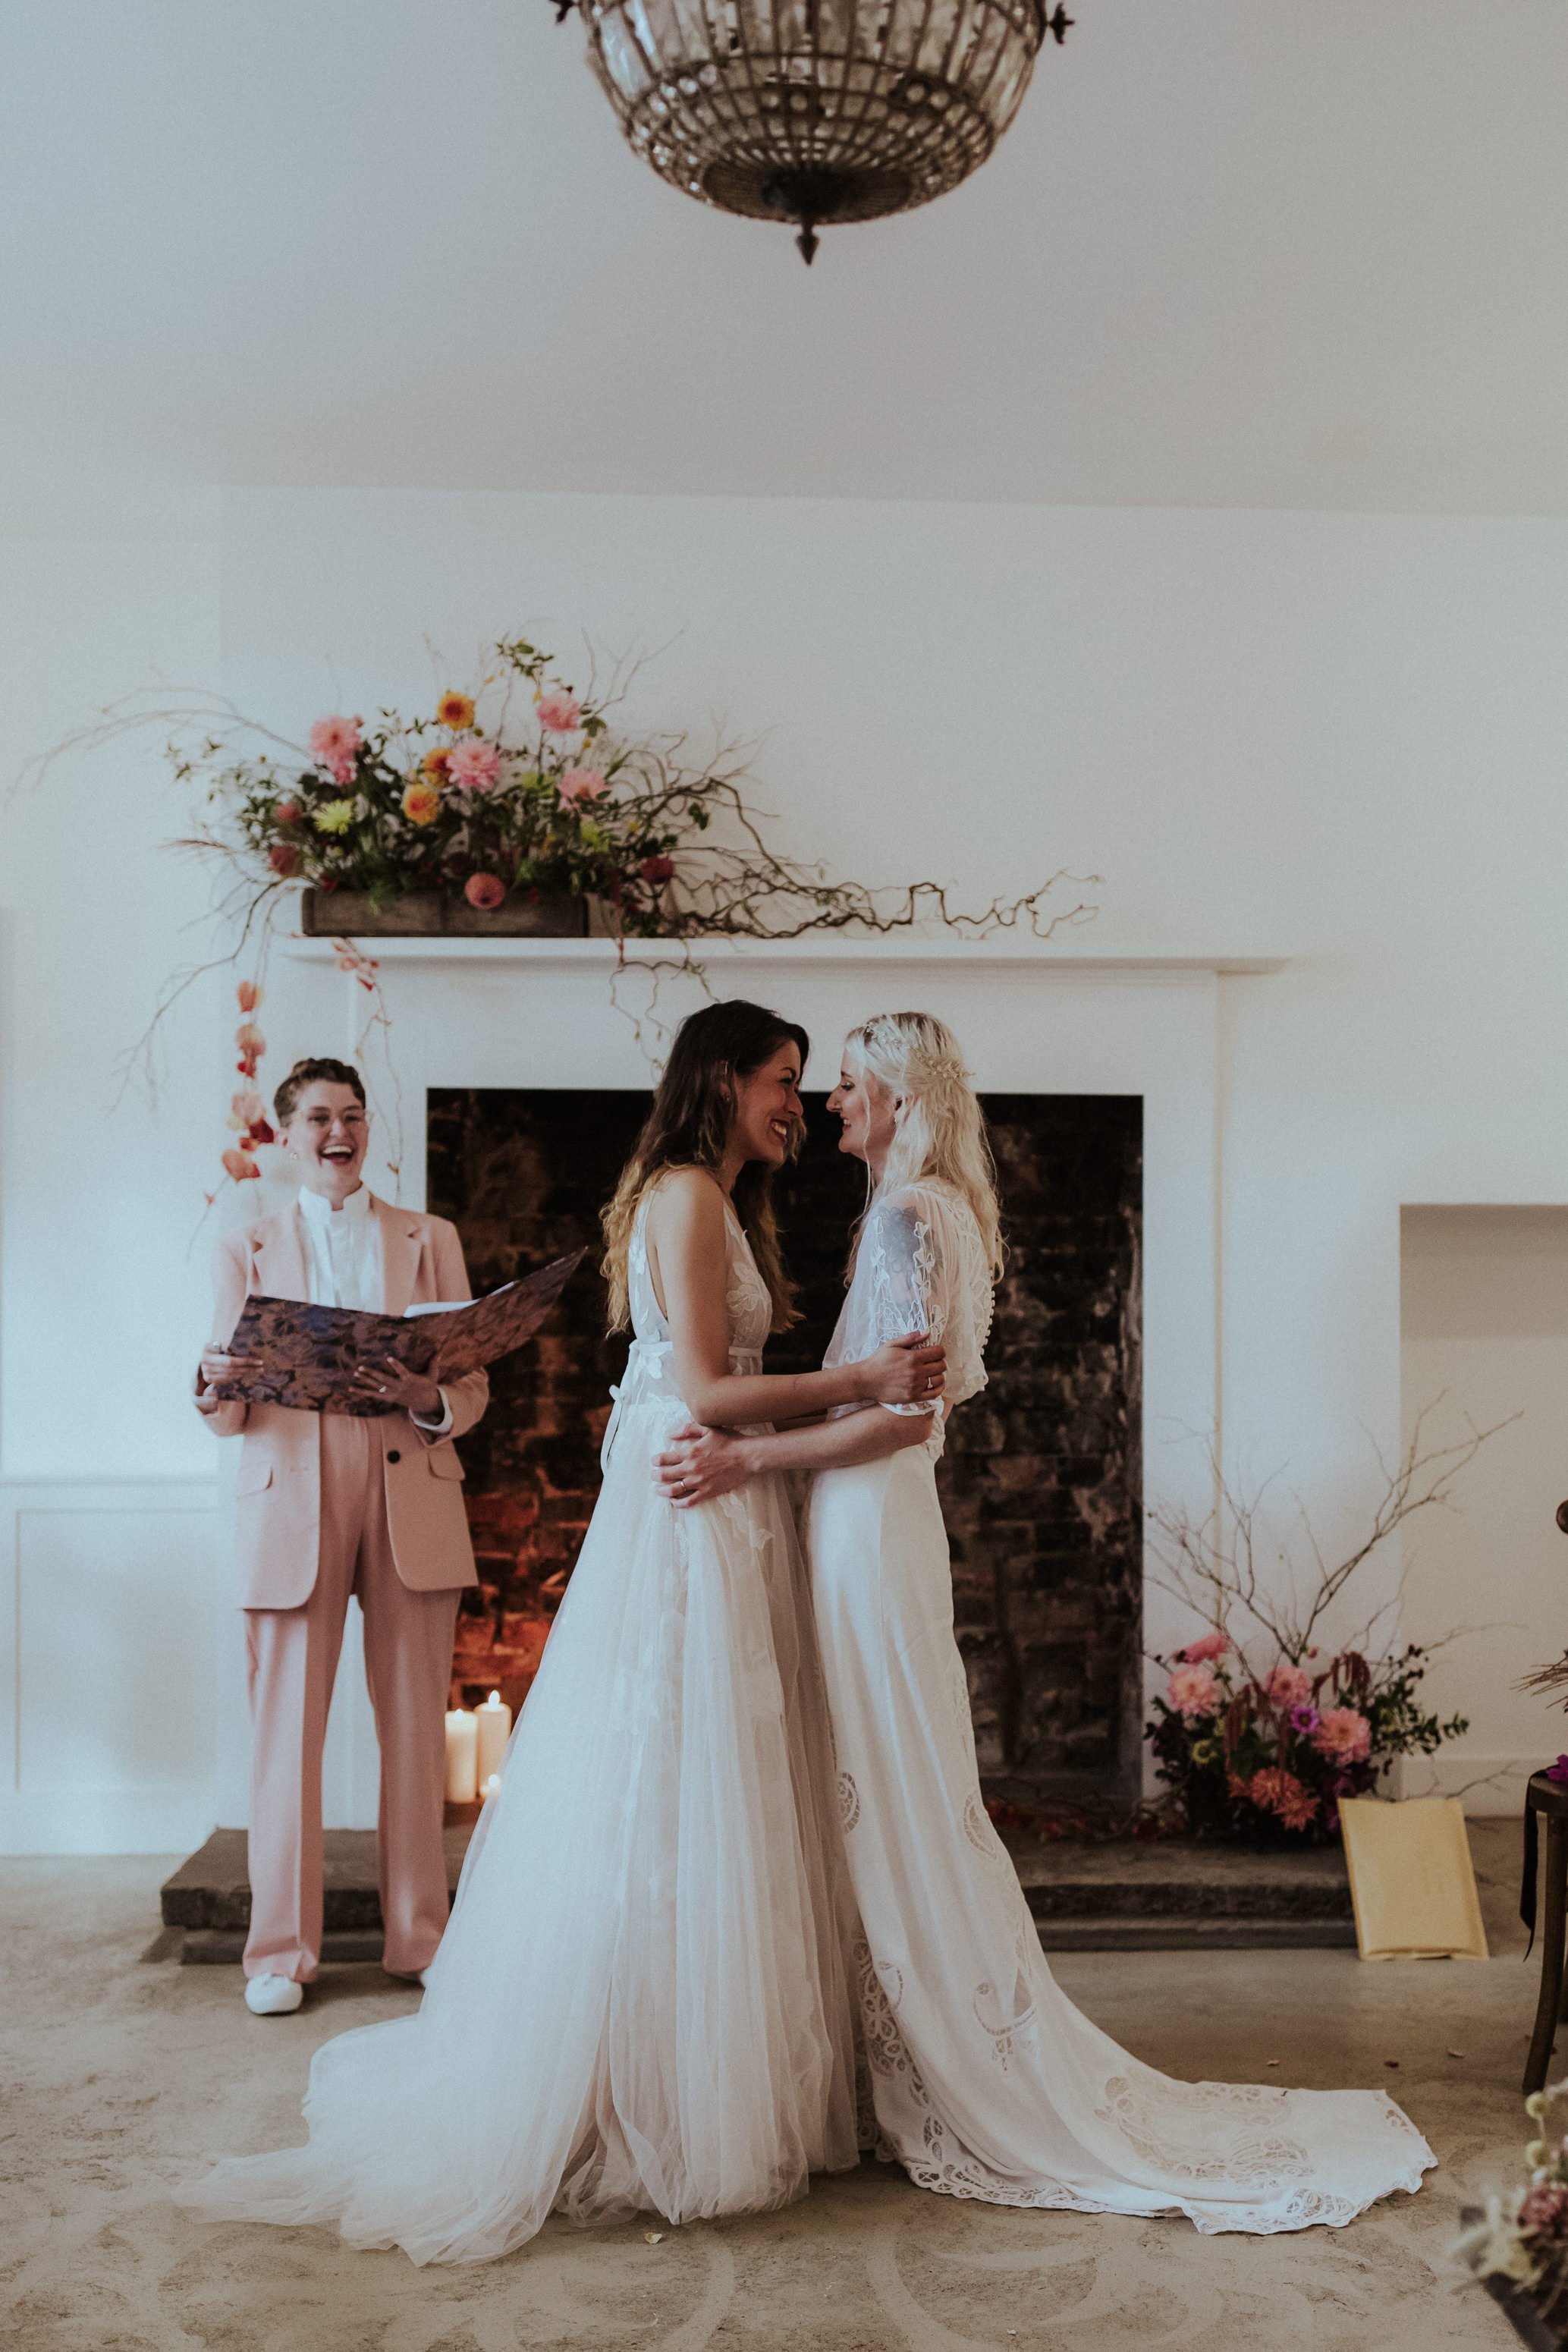  The celebrant is stood to the side of the brides with her folder open smiling. She is looking over at the brides, who are standing face to face looking into each others eyes and laughing at a moment created for their ceremony by the funny wedding ce